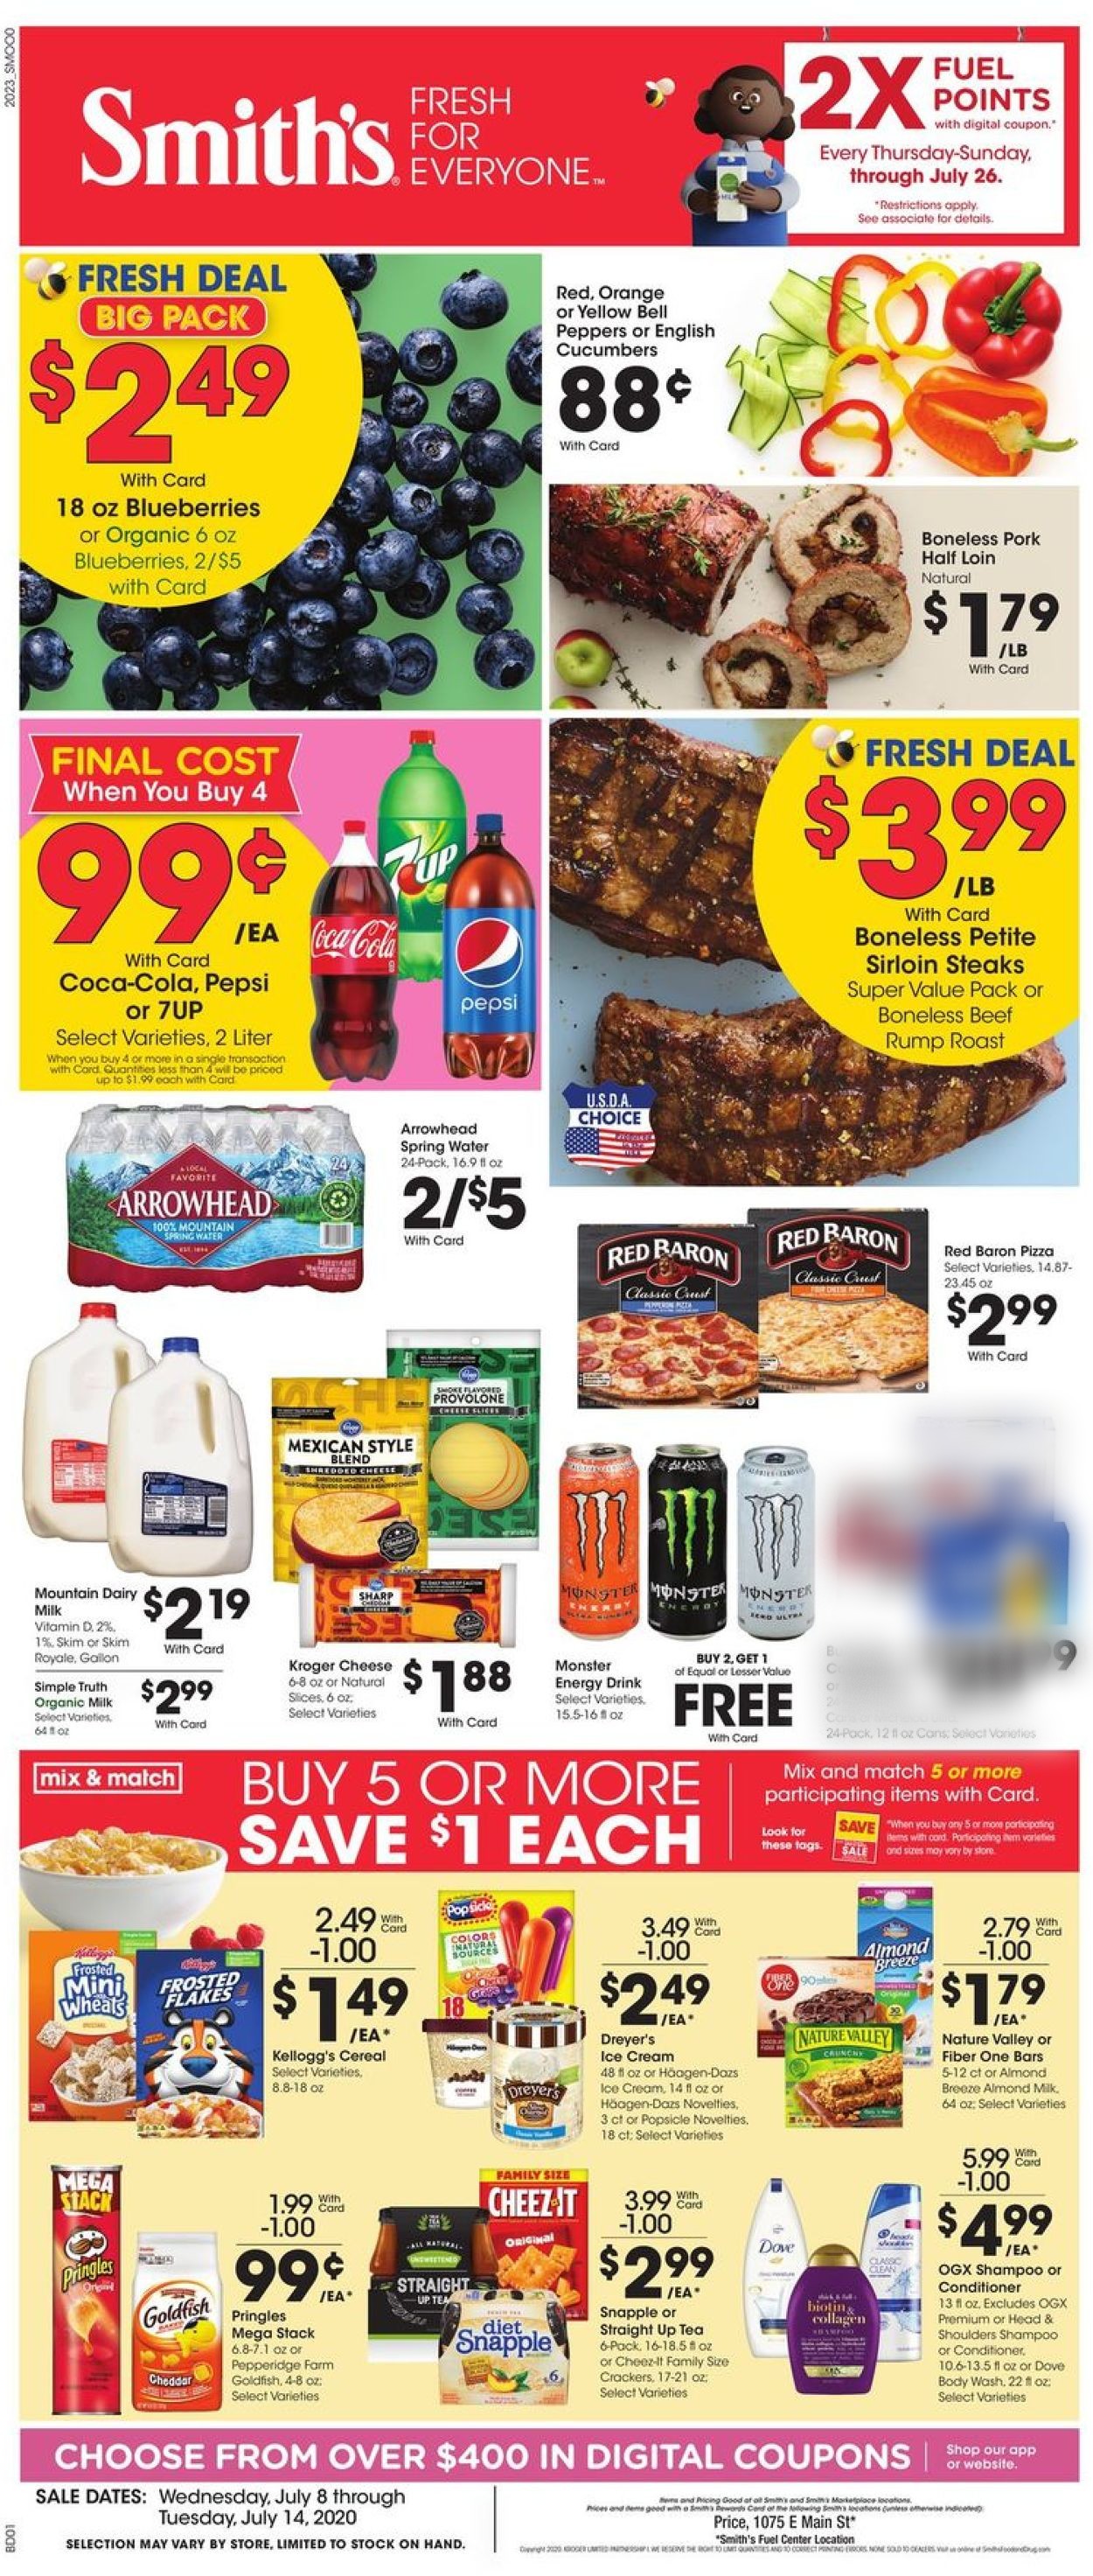 Smith's Current weekly ad 07/08 - 07/14/2020 - frequent-ads.com